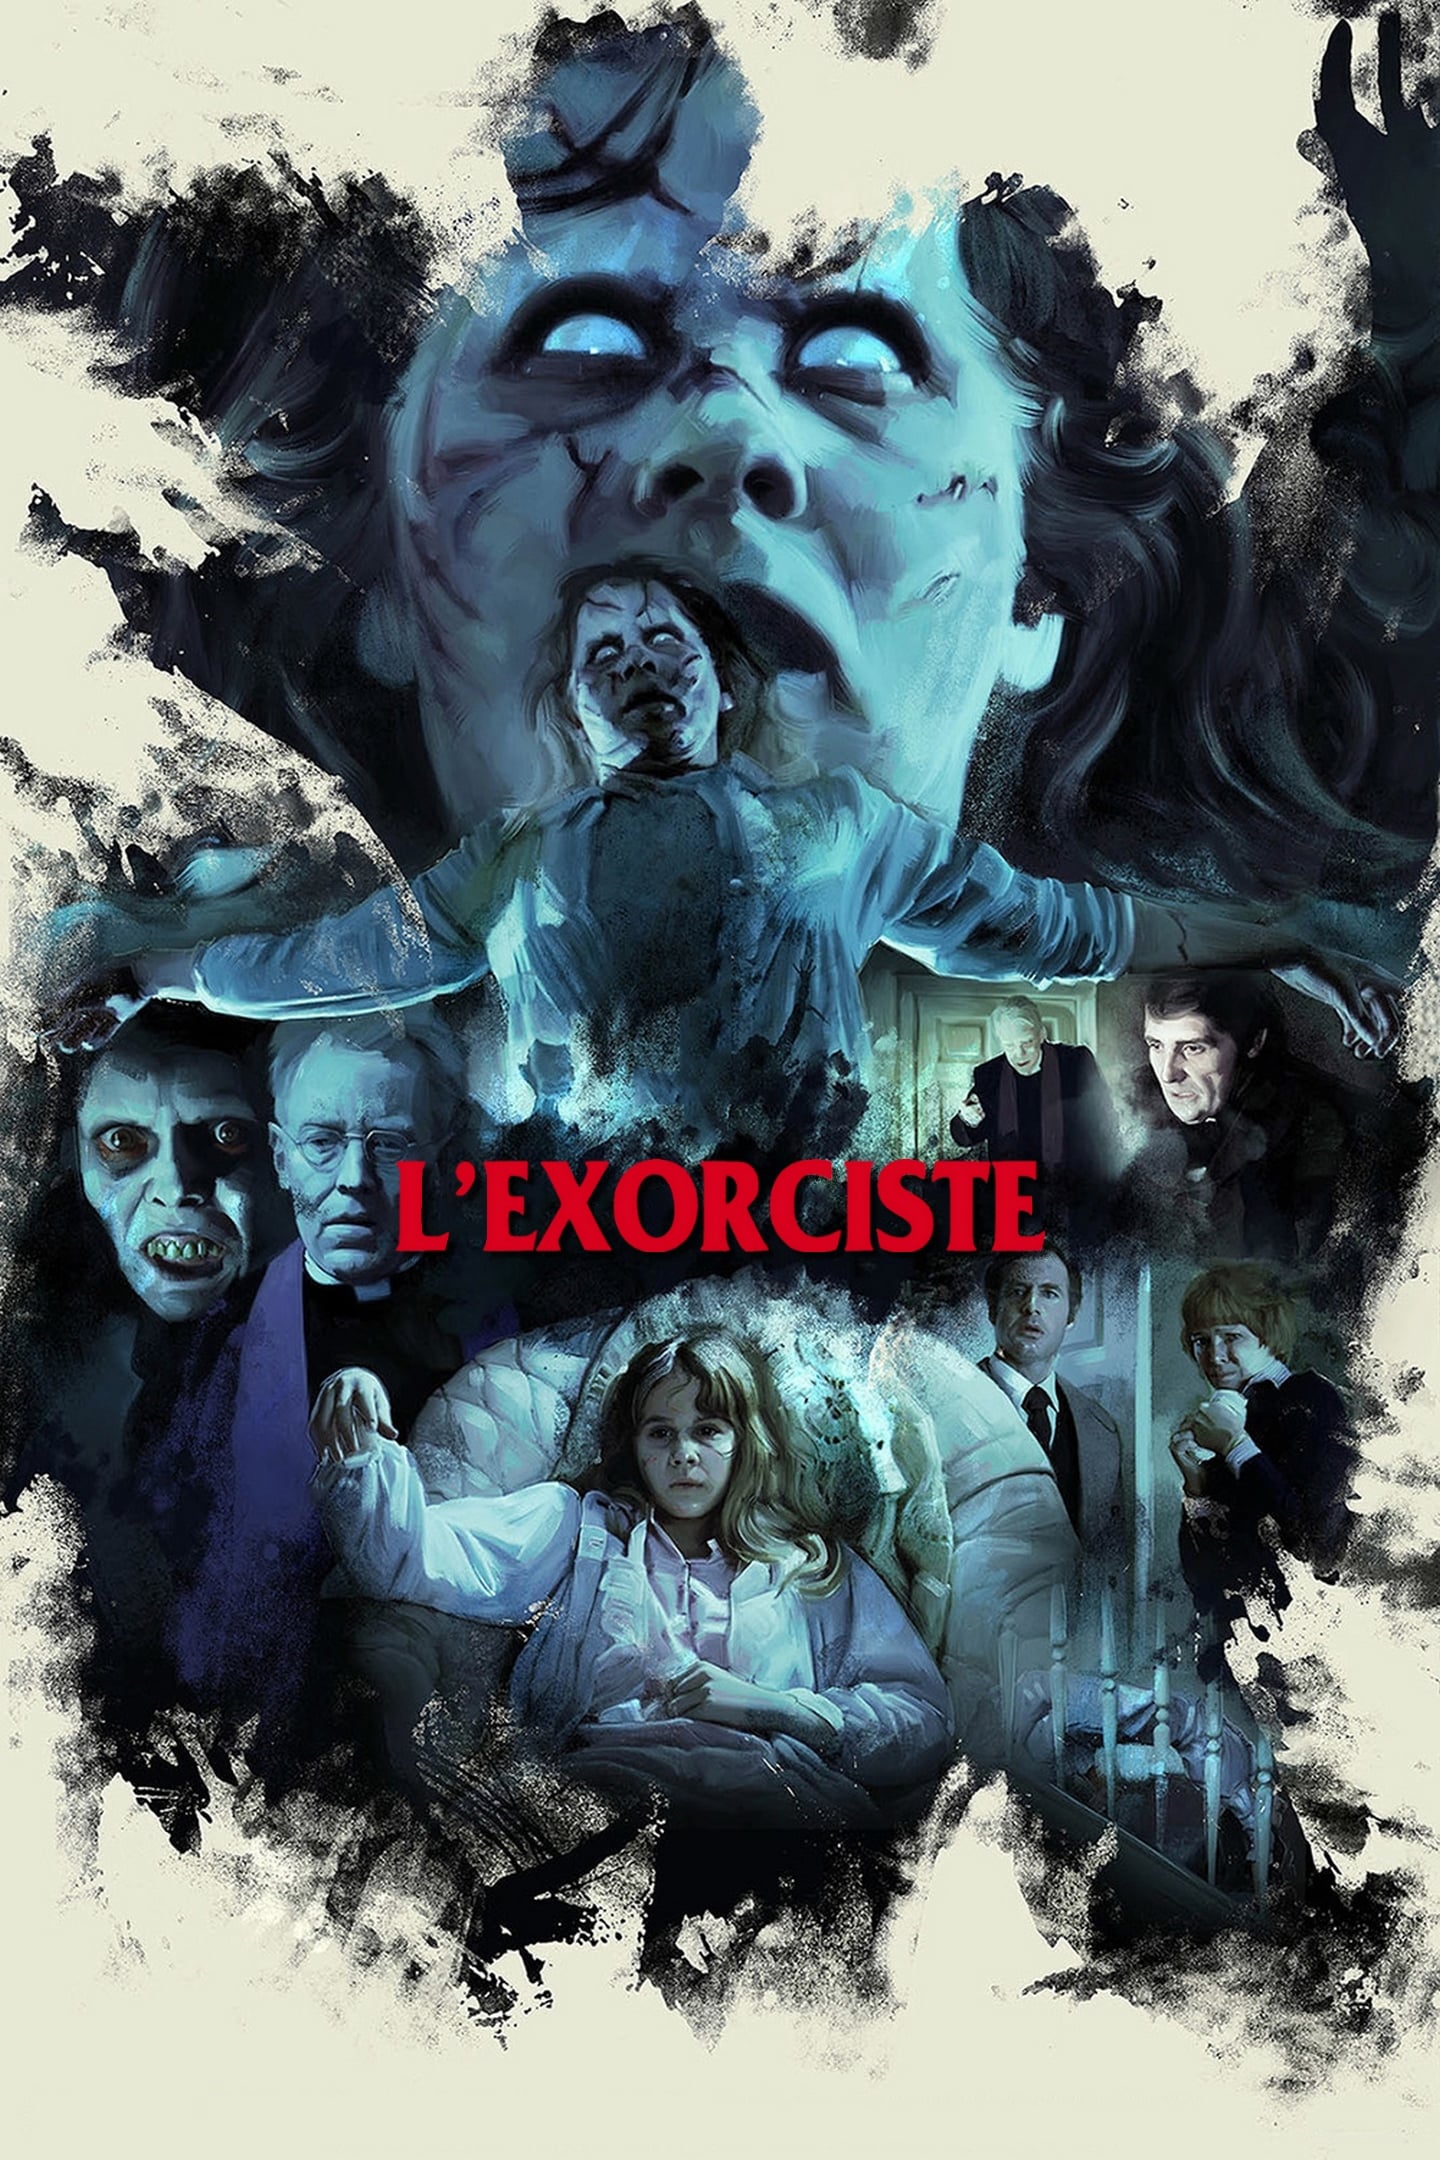 The exorcist movie poster